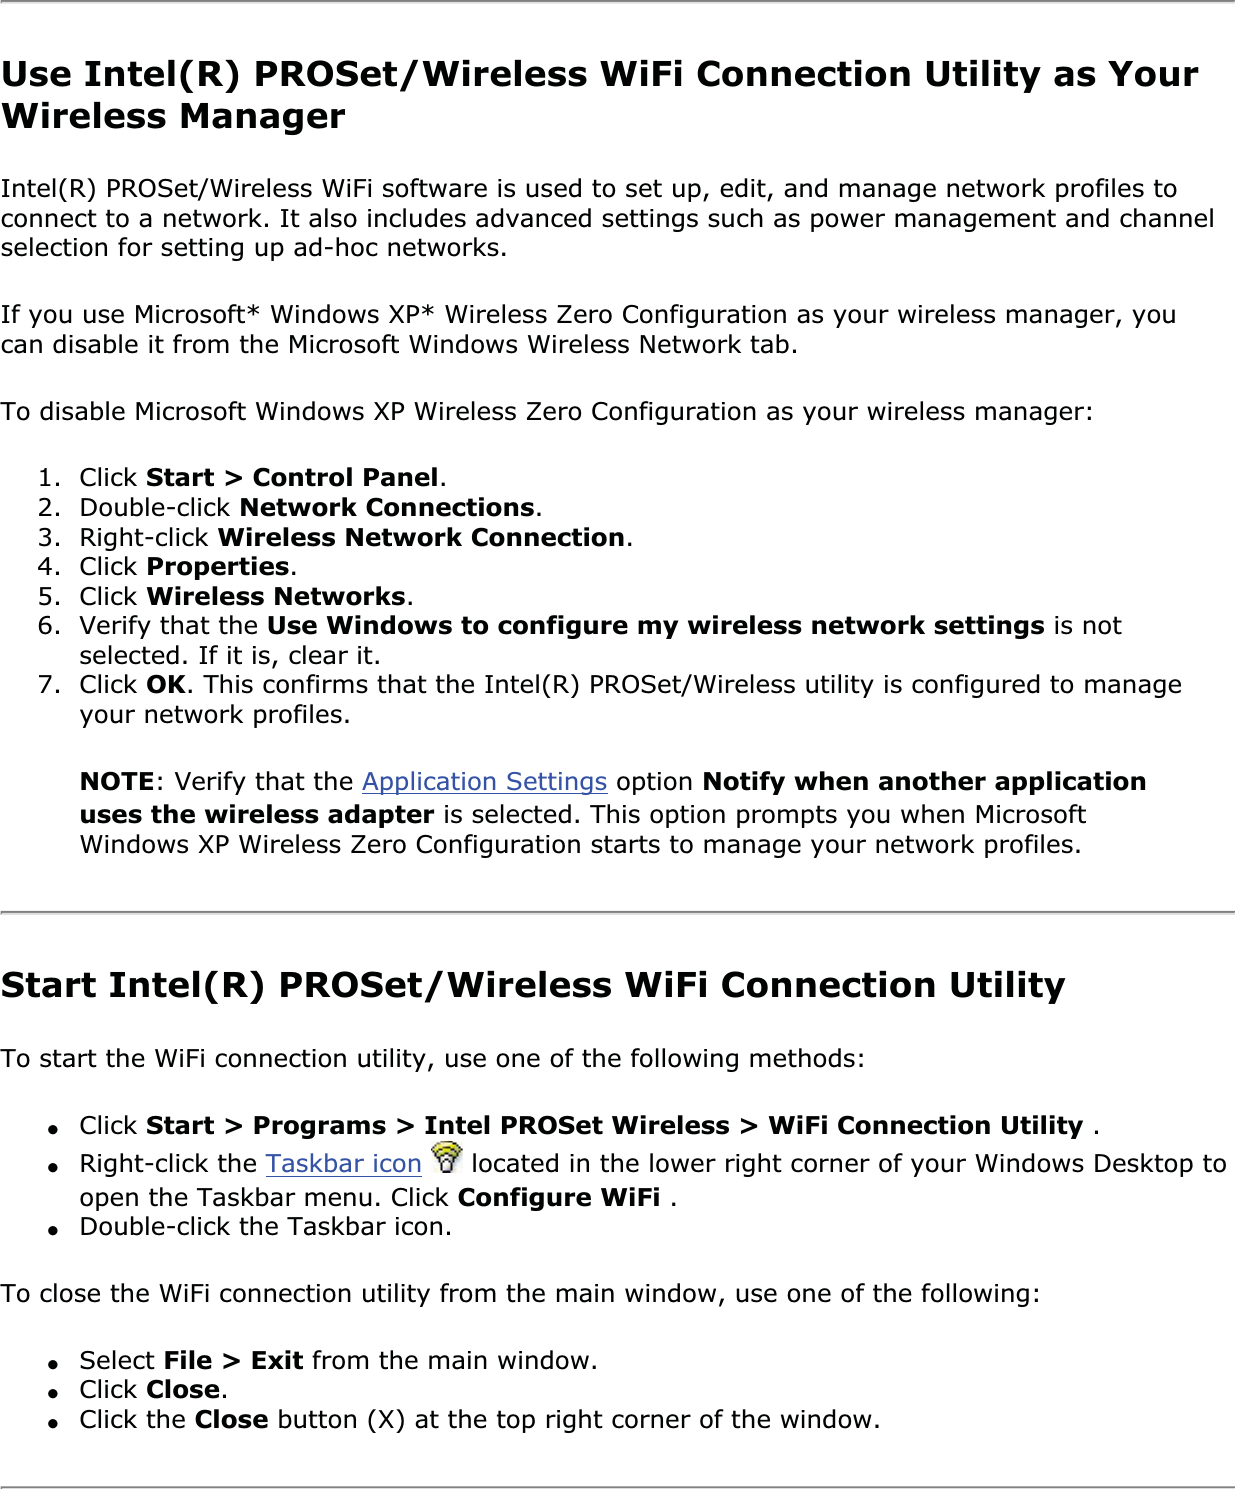 Use Intel(R) PROSet/Wireless WiFi Connection Utility as Your Wireless ManagerIntel(R) PROSet/Wireless WiFi software is used to set up, edit, and manage network profiles to connect to a network. It also includes advanced settings such as power management and channel selection for setting up ad-hoc networks.If you use Microsoft* Windows XP* Wireless Zero Configuration as your wireless manager, you can disable it from the Microsoft Windows Wireless Network tab.To disable Microsoft Windows XP Wireless Zero Configuration as your wireless manager:1. Click Start &gt; Control Panel.2. Double-click Network Connections.3. Right-click Wireless Network Connection.4. Click Properties.5. Click Wireless Networks.6. Verify that the Use Windows to configure my wireless network settings is not selected. If it is, clear it.7. Click OK. This confirms that the Intel(R) PROSet/Wireless utility is configured to manage your network profiles.NOTE: Verify that the Application Settings option Notify when another application uses the wireless adapter is selected. This option prompts you when Microsoft Windows XP Wireless Zero Configuration starts to manage your network profiles.Start Intel(R) PROSet/Wireless WiFi Connection Utility To start the WiFi connection utility, use one of the following methods:●Click Start &gt; Programs &gt; Intel PROSet Wireless &gt; WiFi Connection Utility .●Right-click the Taskbar icon  located in the lower right corner of your Windows Desktop to open the Taskbar menu. Click Configure WiFi .●Double-click the Taskbar icon.To close the WiFi connection utility from the main window, use one of the following:●Select File &gt; Exit from the main window.●Click Close.●Click the Close button (X) at the top right corner of the window.